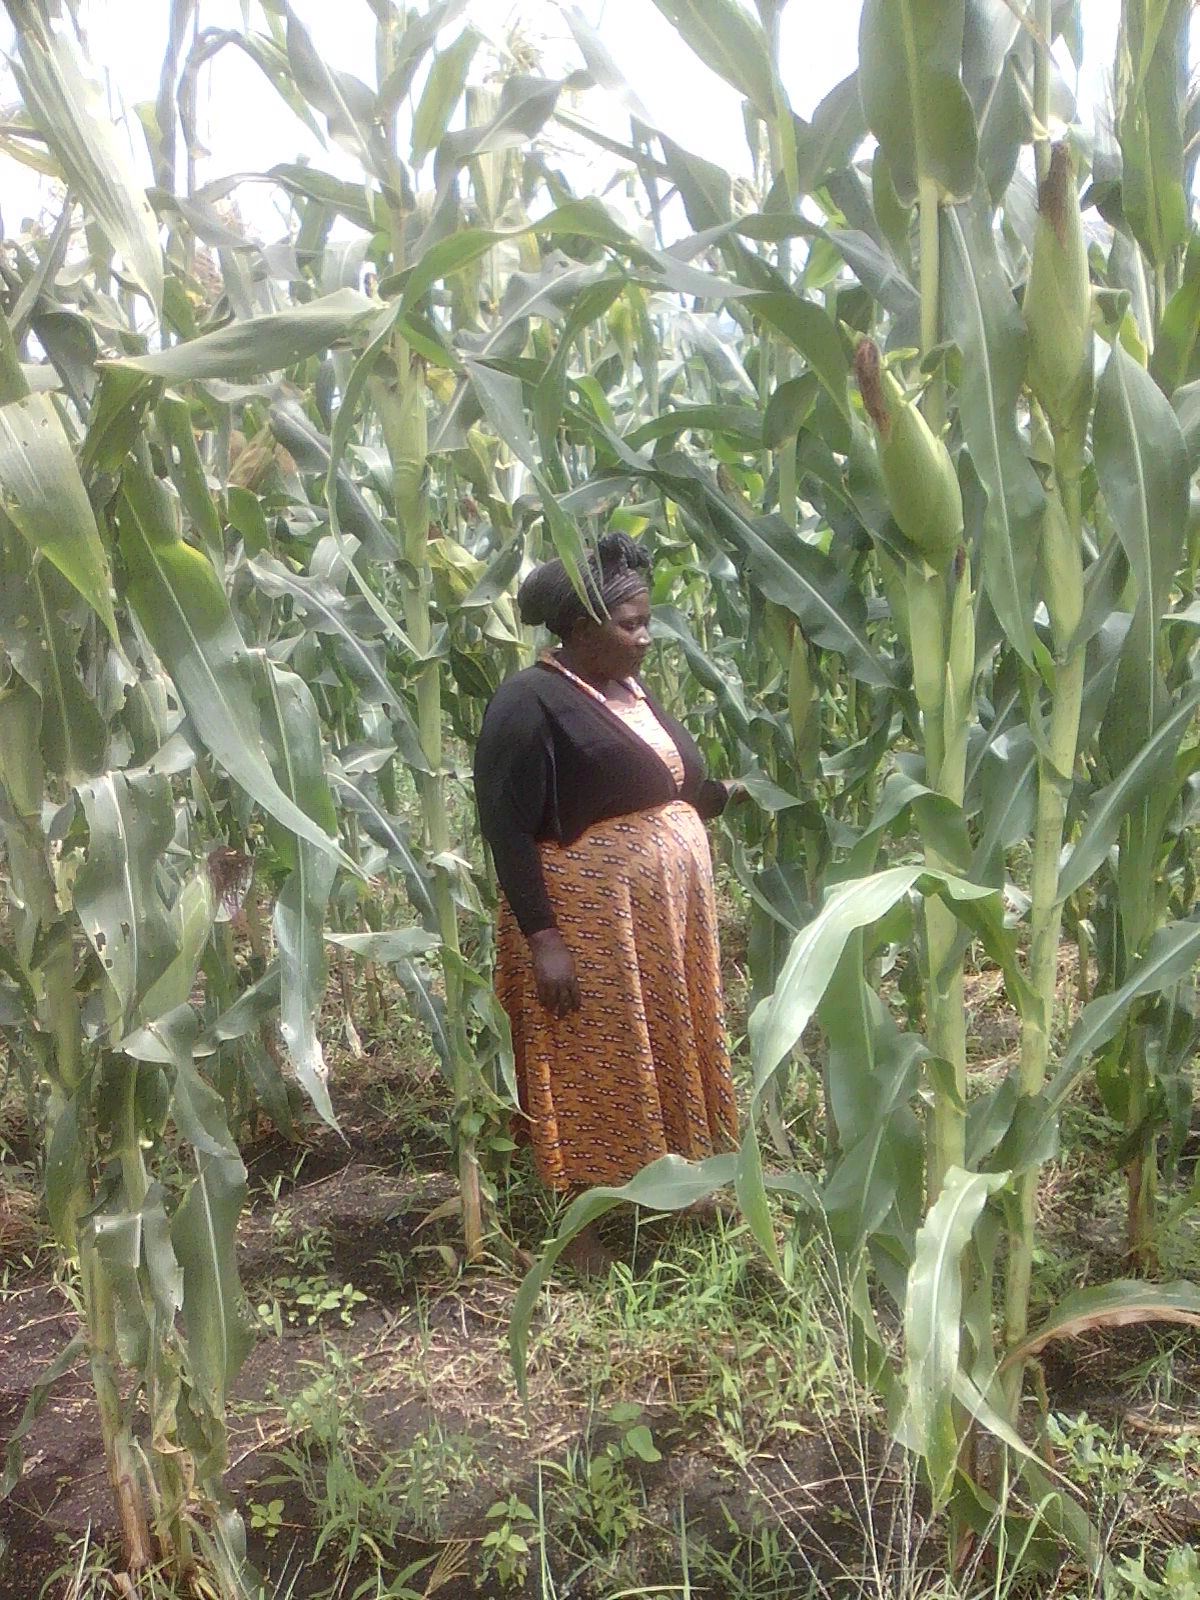 MULEMBA PASCEZIA SRCDO CHAIRPERSON DURING MONITORING AND EVALUATING OF THE MAIZE DEMONSTRATION GARDEN PROGRESS.jpg